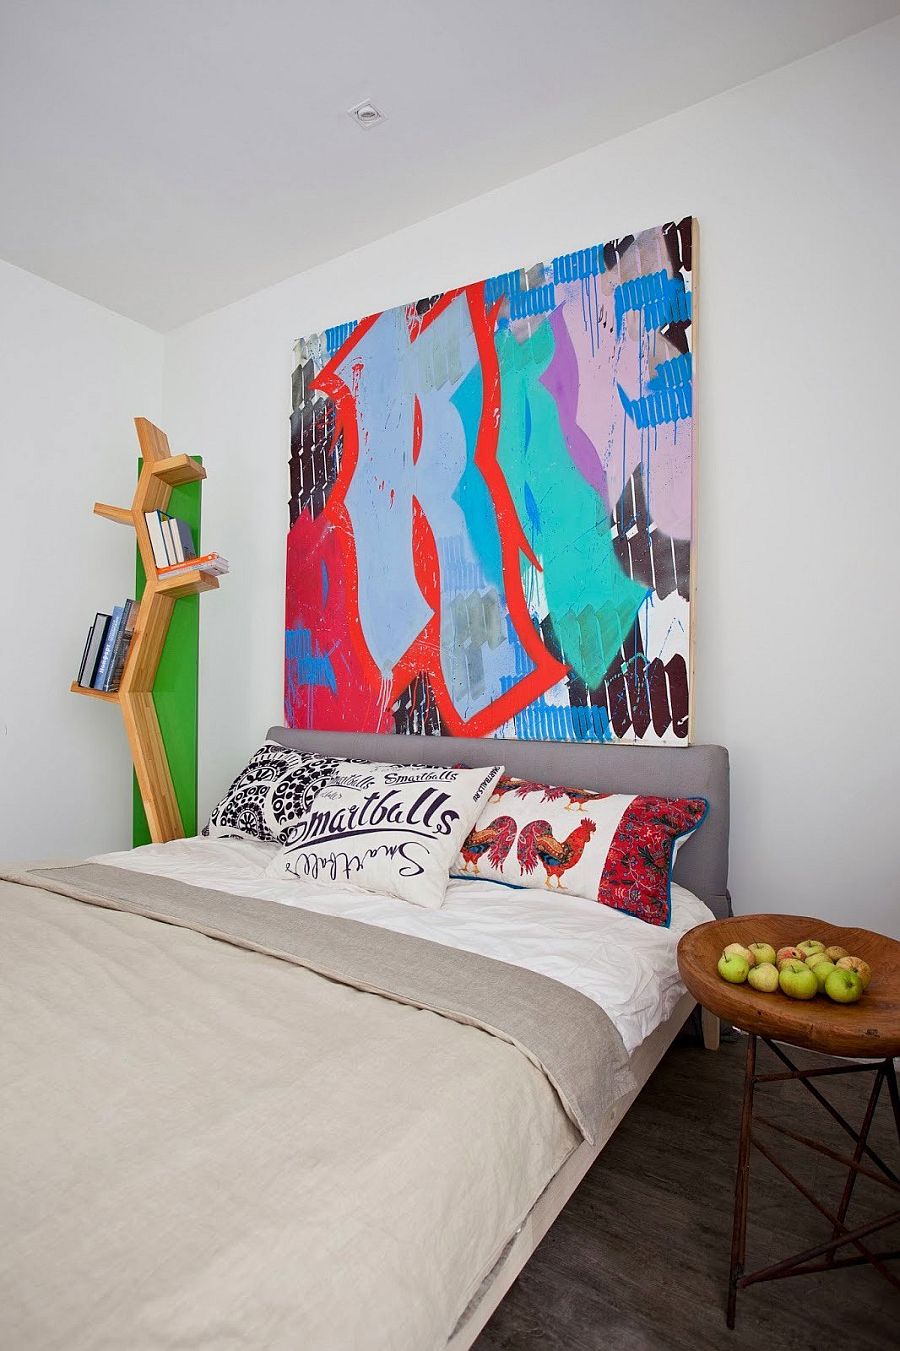 Bookcase, pillows and wall art add color to the white bedroom